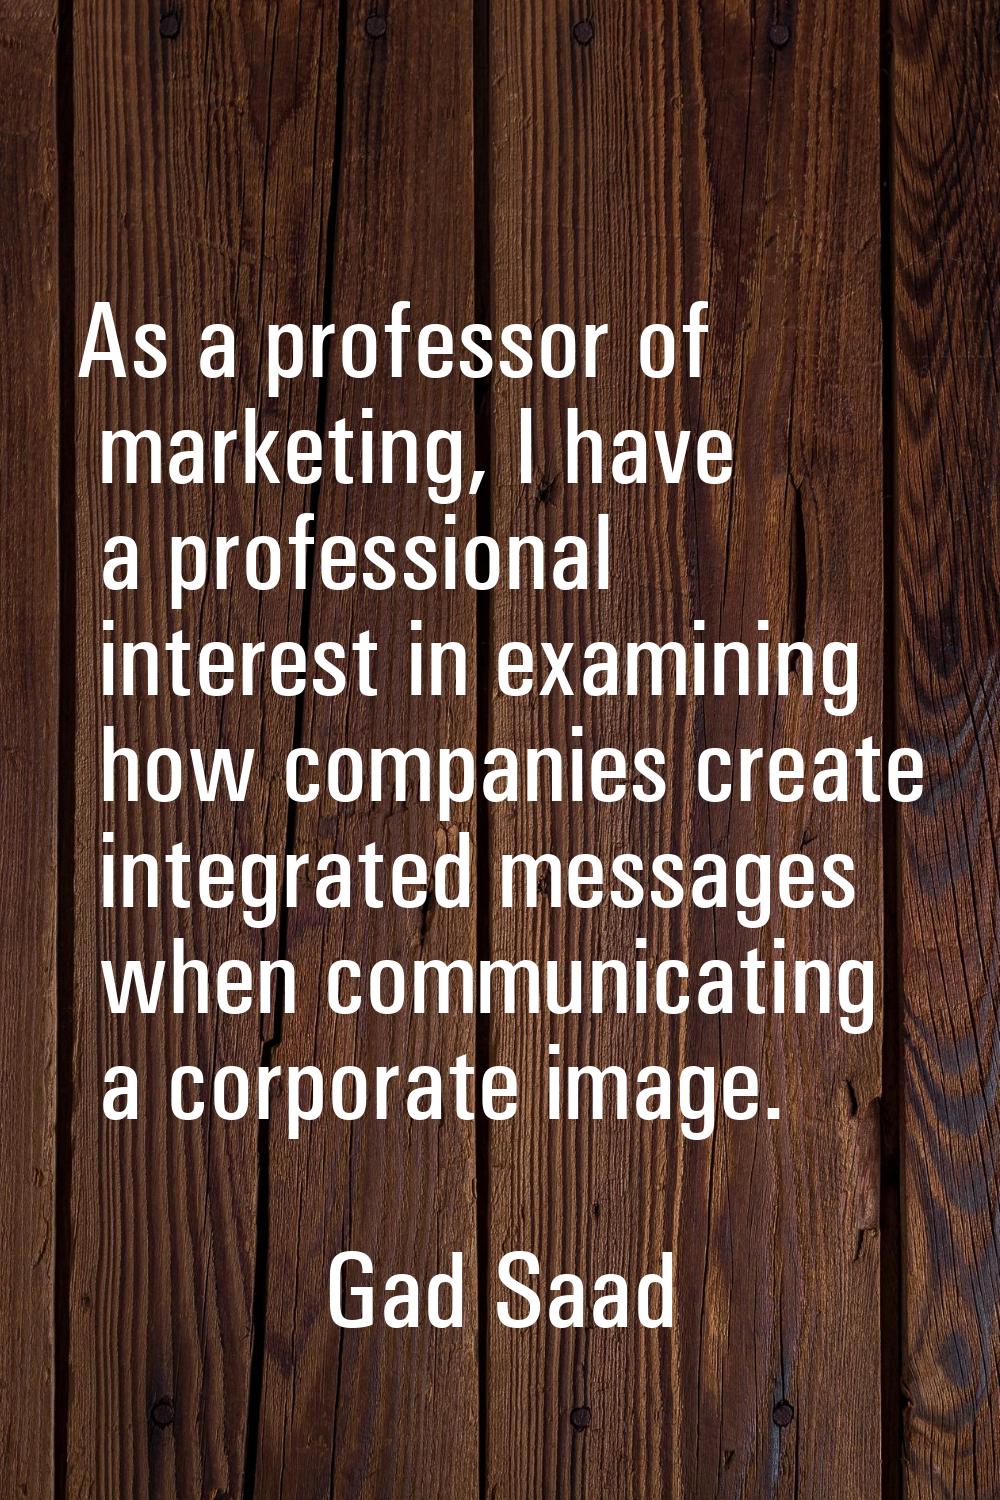 As a professor of marketing, I have a professional interest in examining how companies create integ